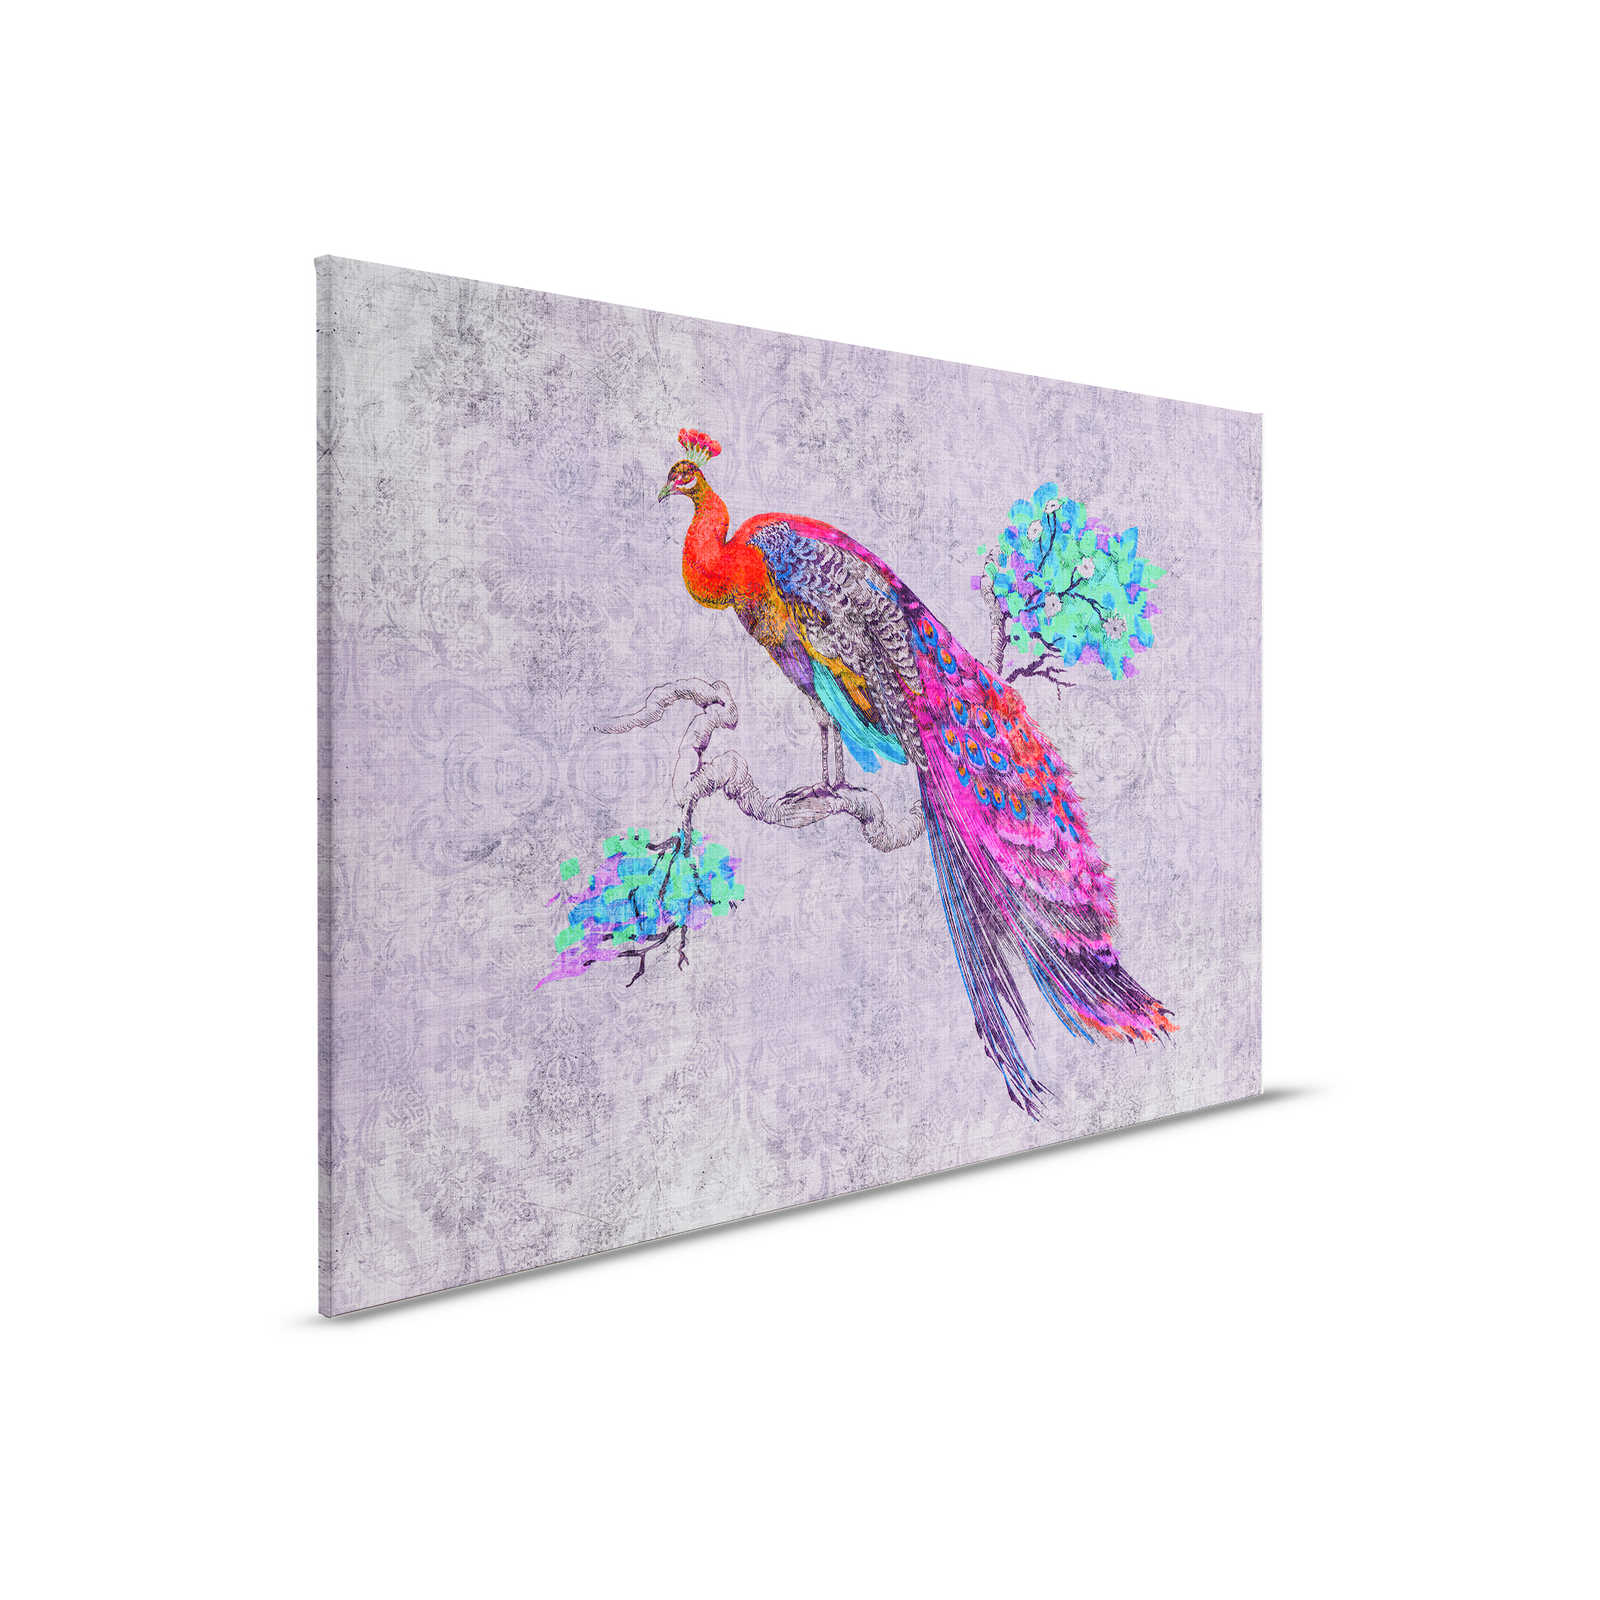 Peacock 3 - Canvas painting with colourful peacock - natural linen structure - 0.90 m x 0.60 m
